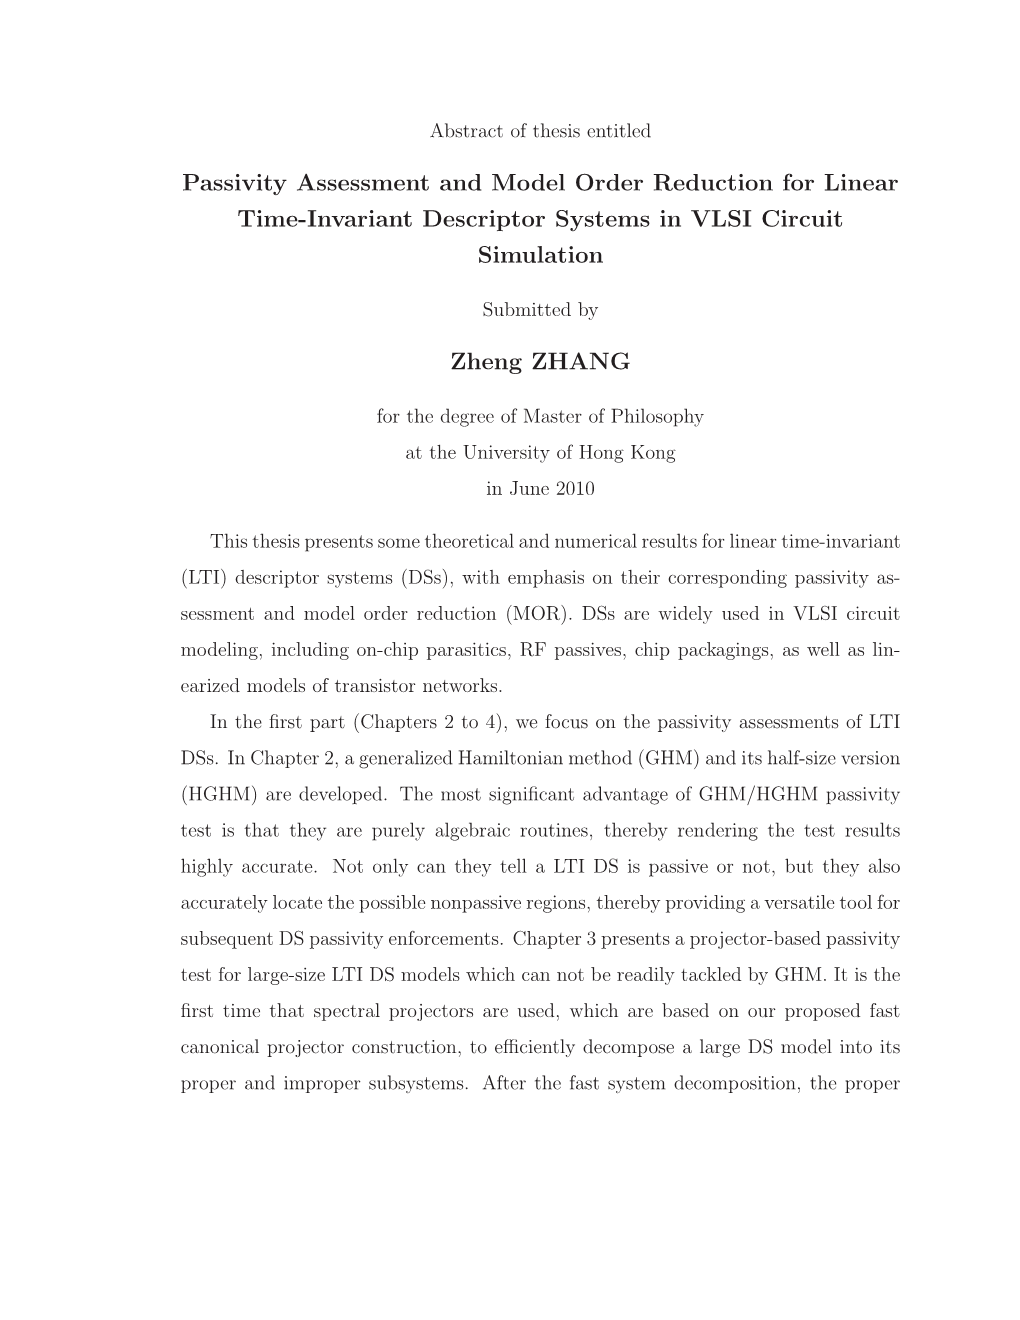 Passivity Assessment and Model Order Reduction for Linear Time-Invariant Descriptor Systems in VLSI Circuit Simulation